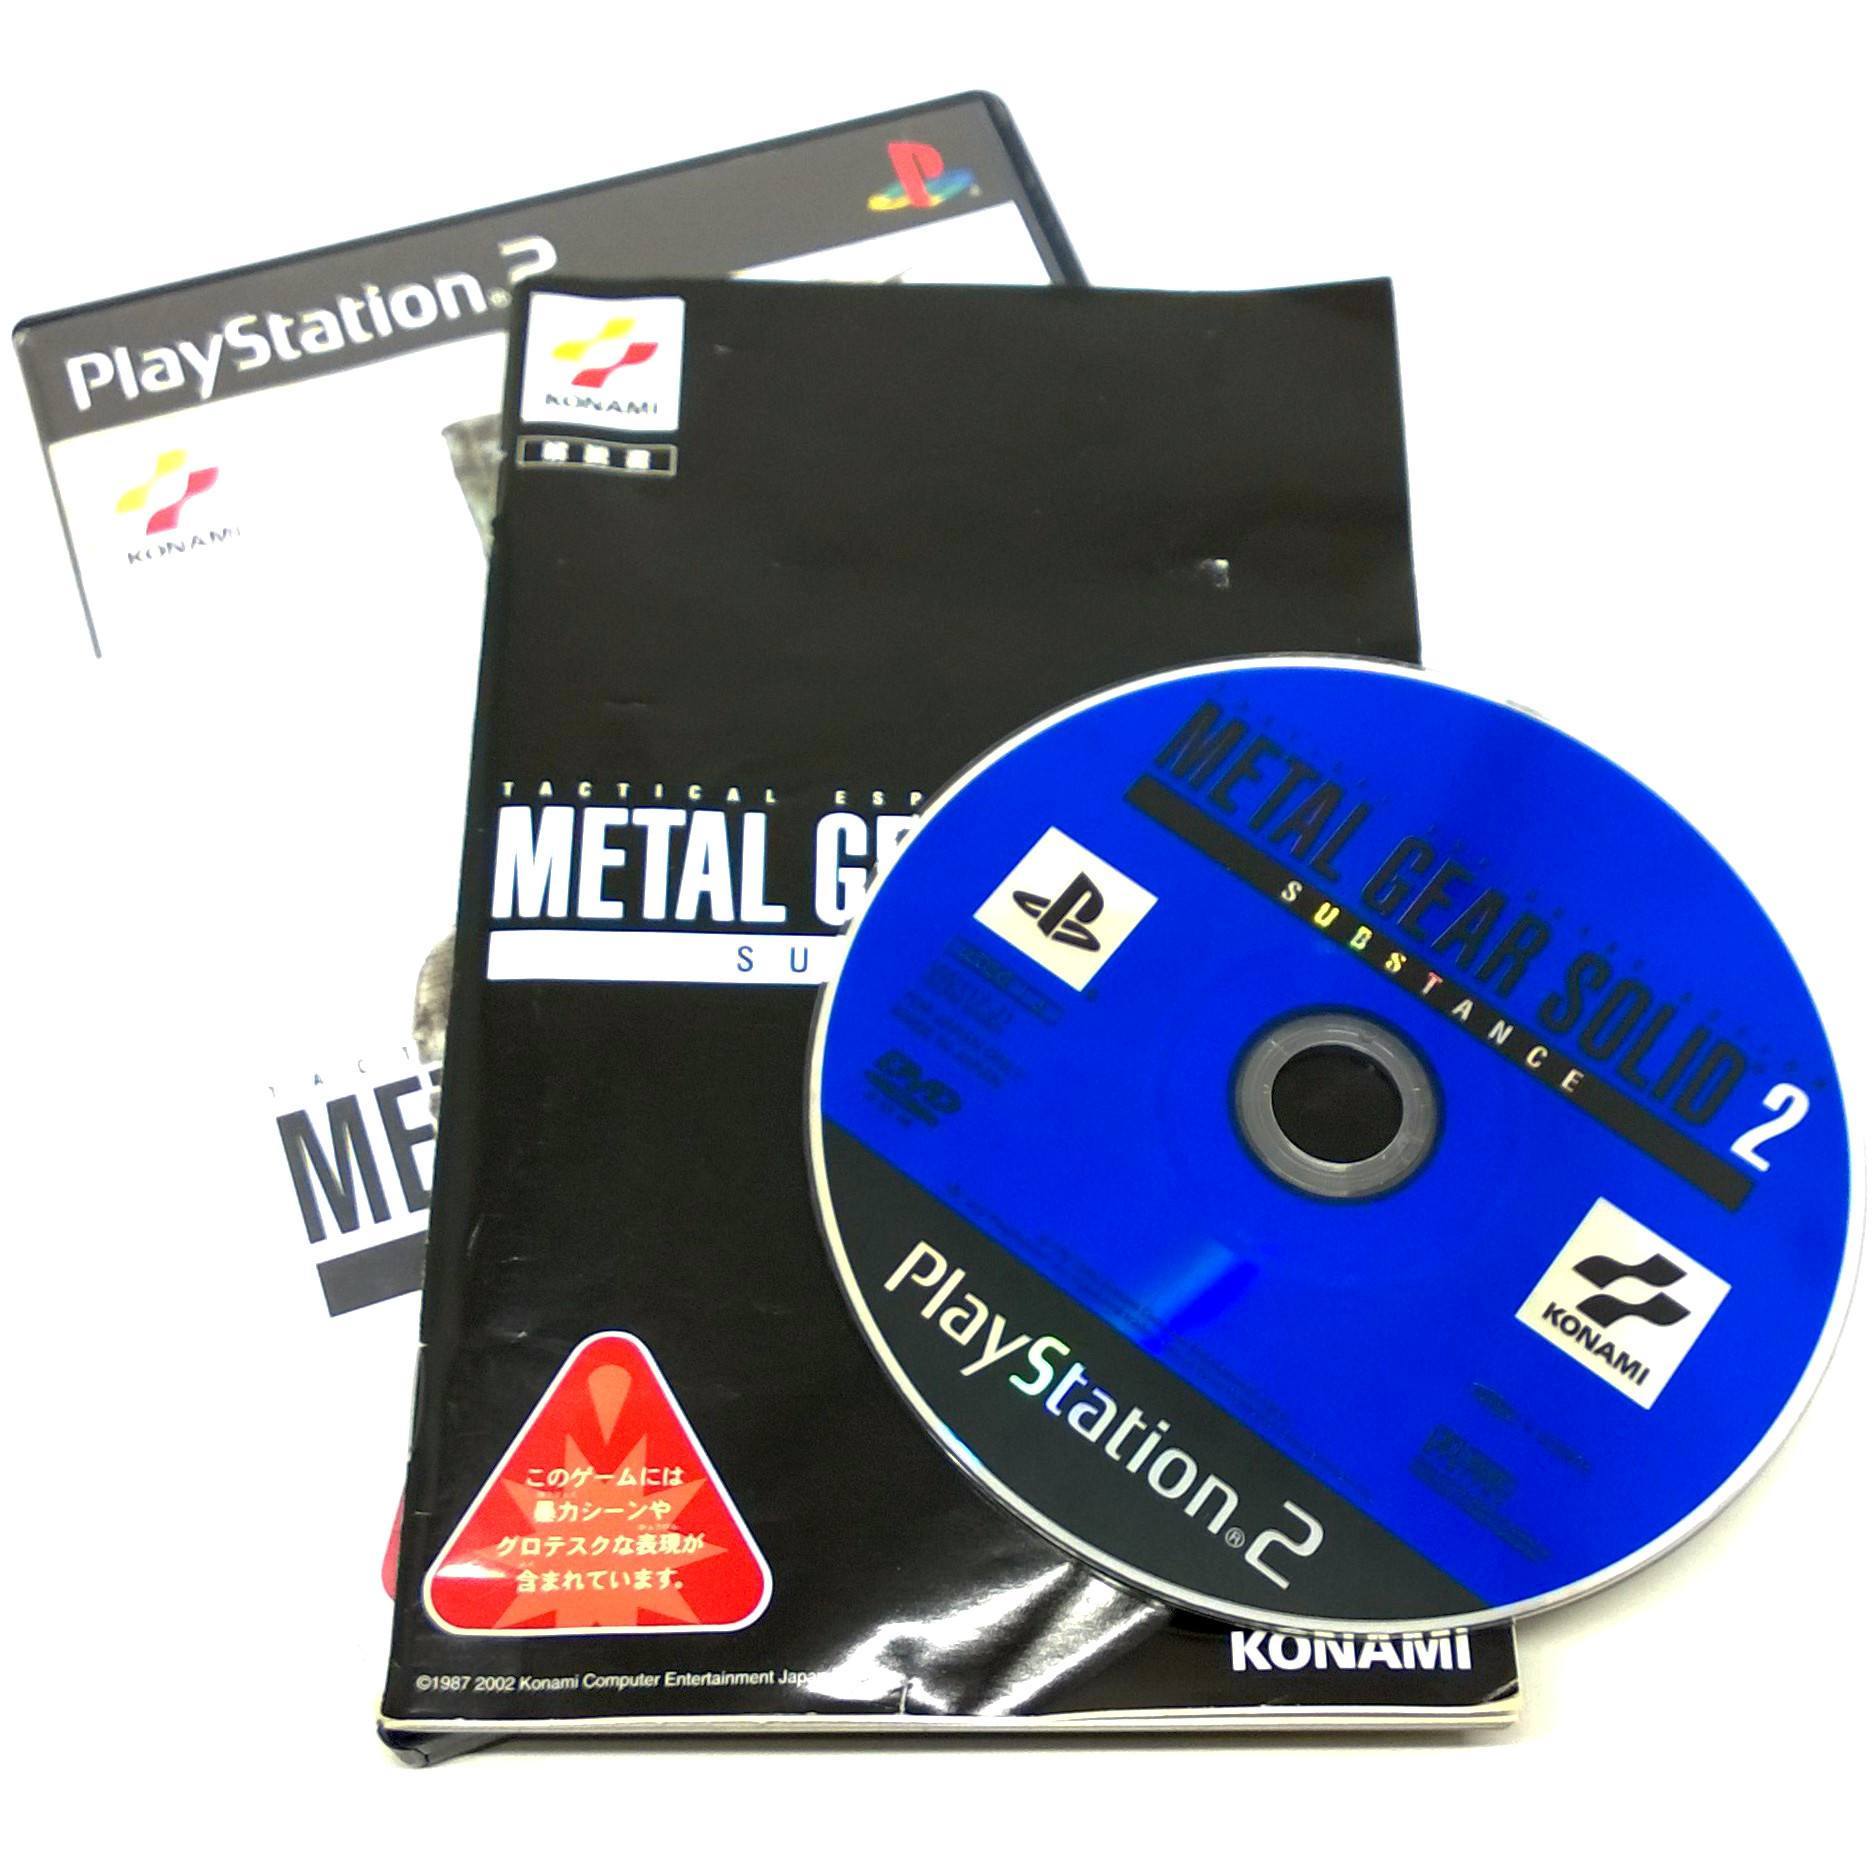 Metal Gear Solid 2: Sons of Liberty Sony PlayStation 2 Game